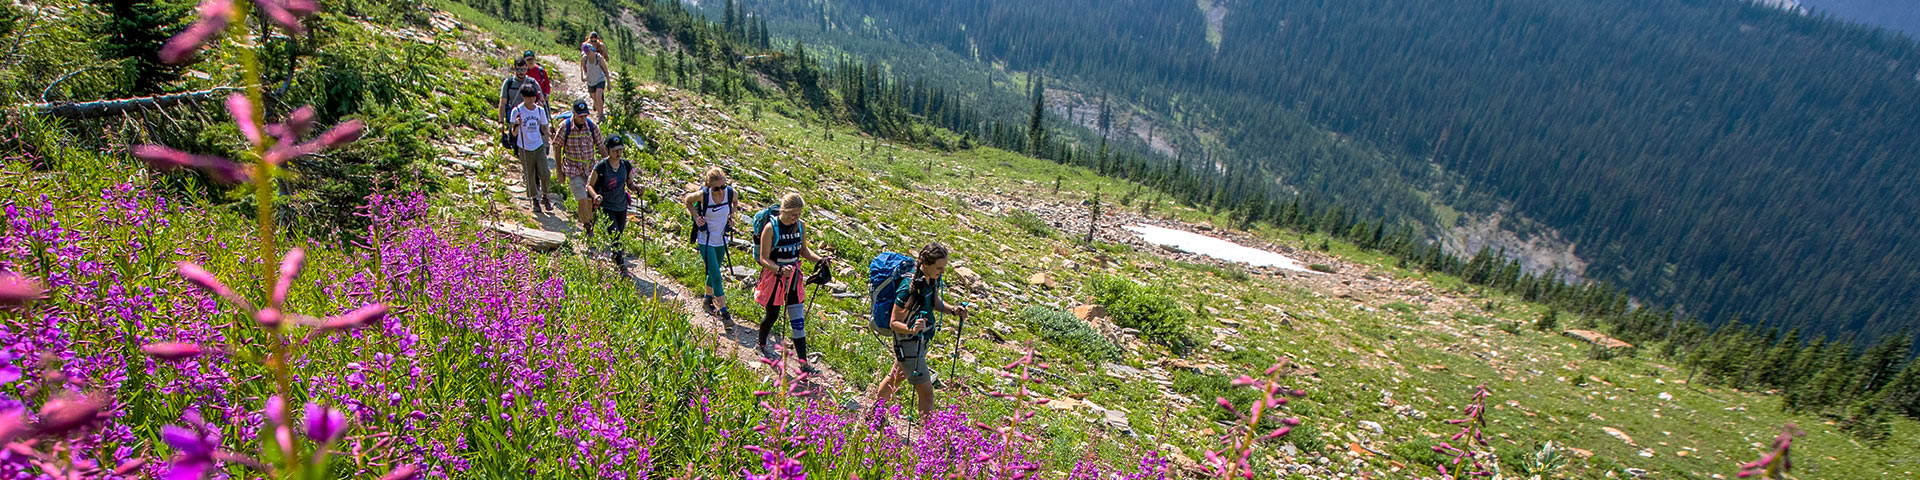 A group of hikers among fireweed flowers